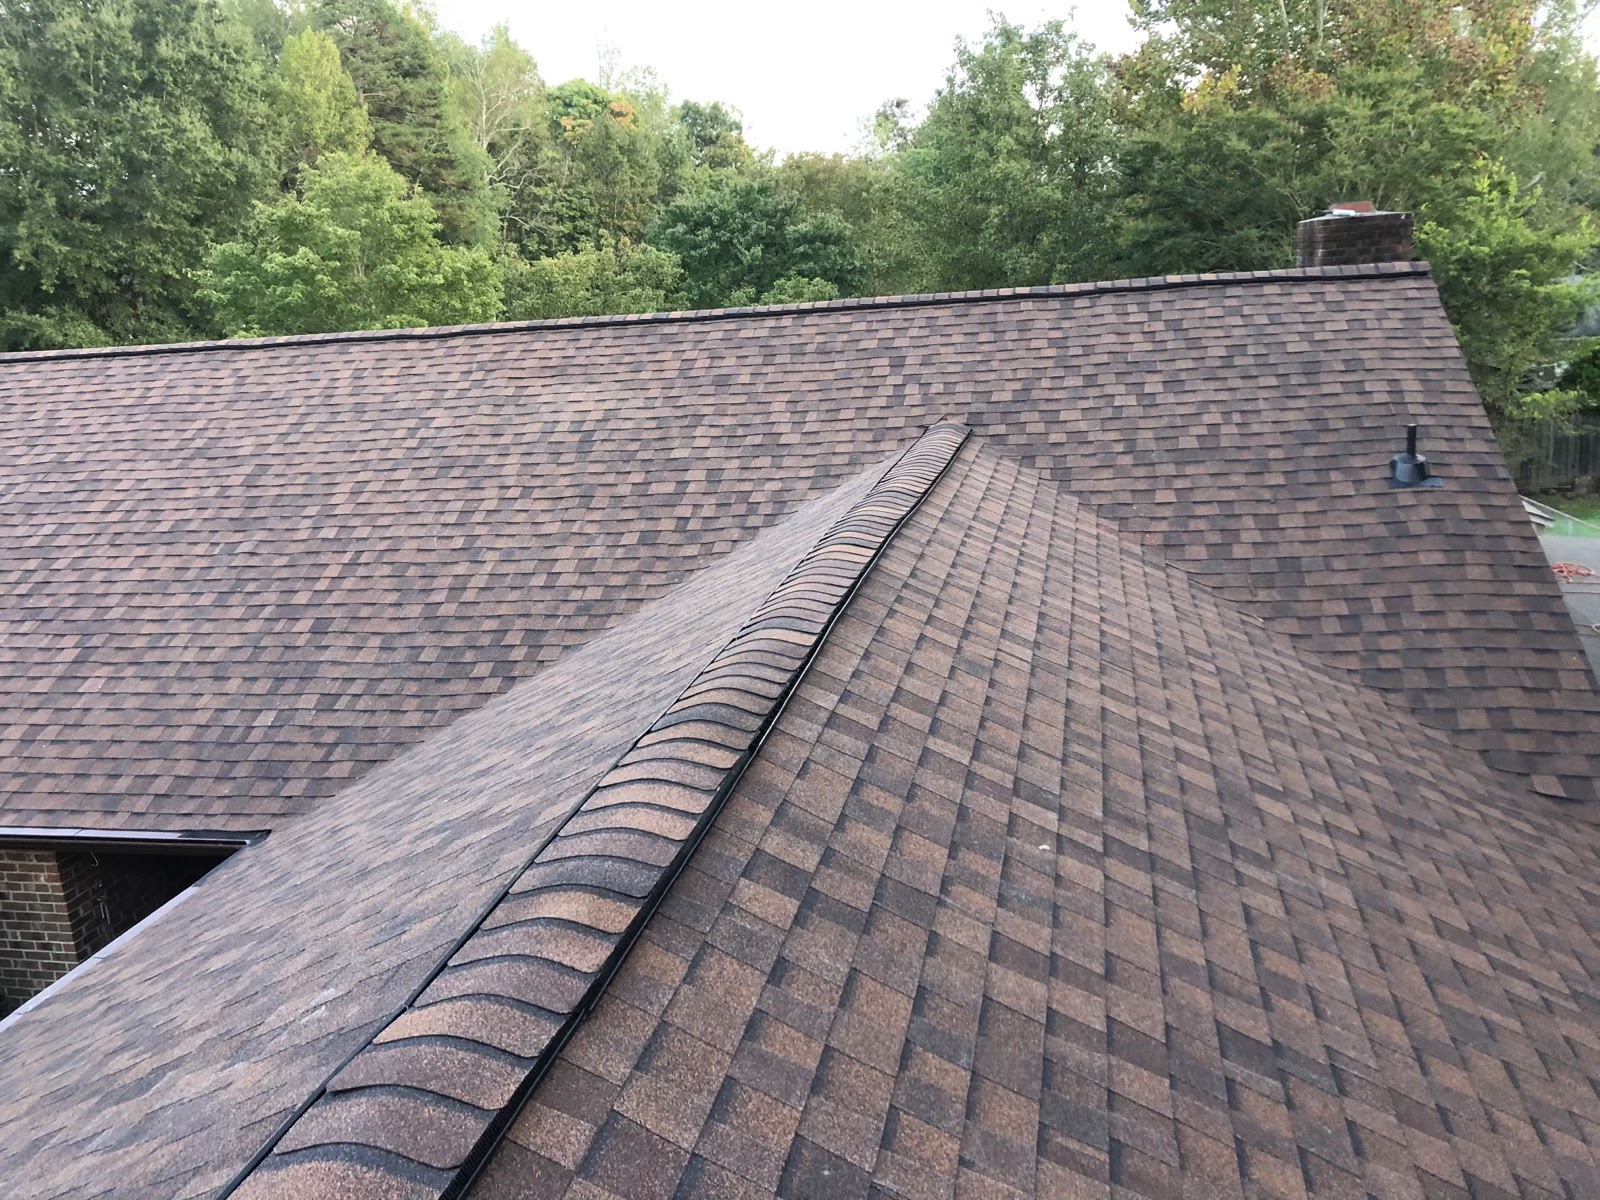 All American Roofing and Restoration